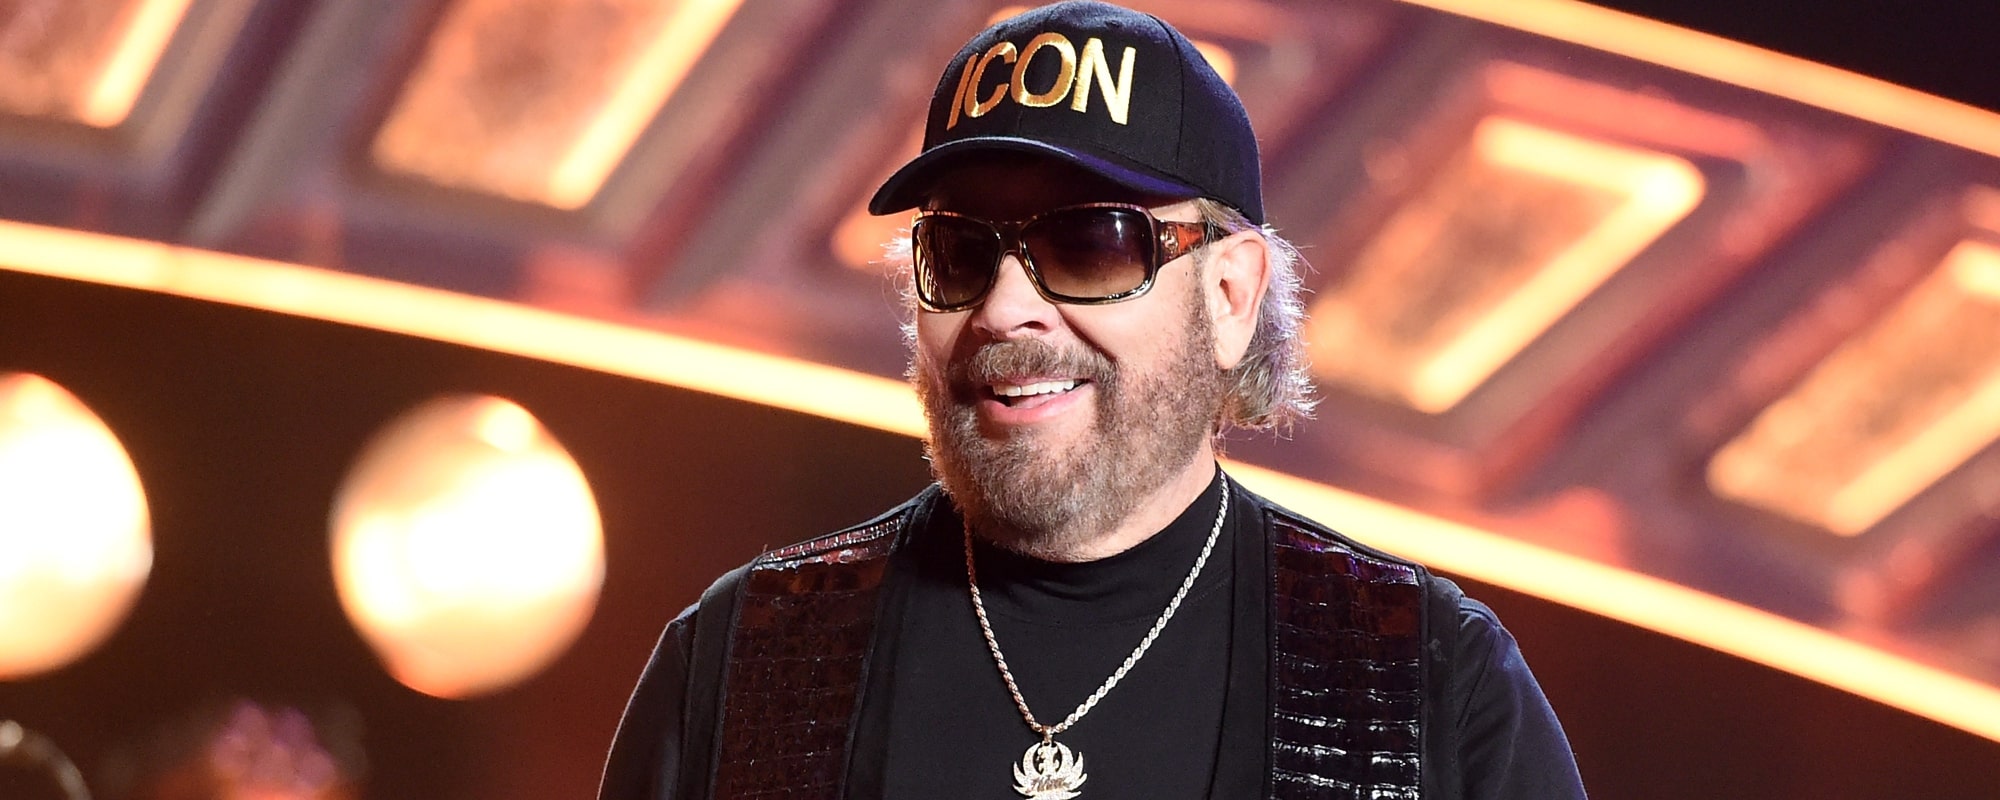 Hank Williams Jr. Fires Up Two Step Inn Crowd with “All My Rowdy Friends Are Coming Over Tonight”